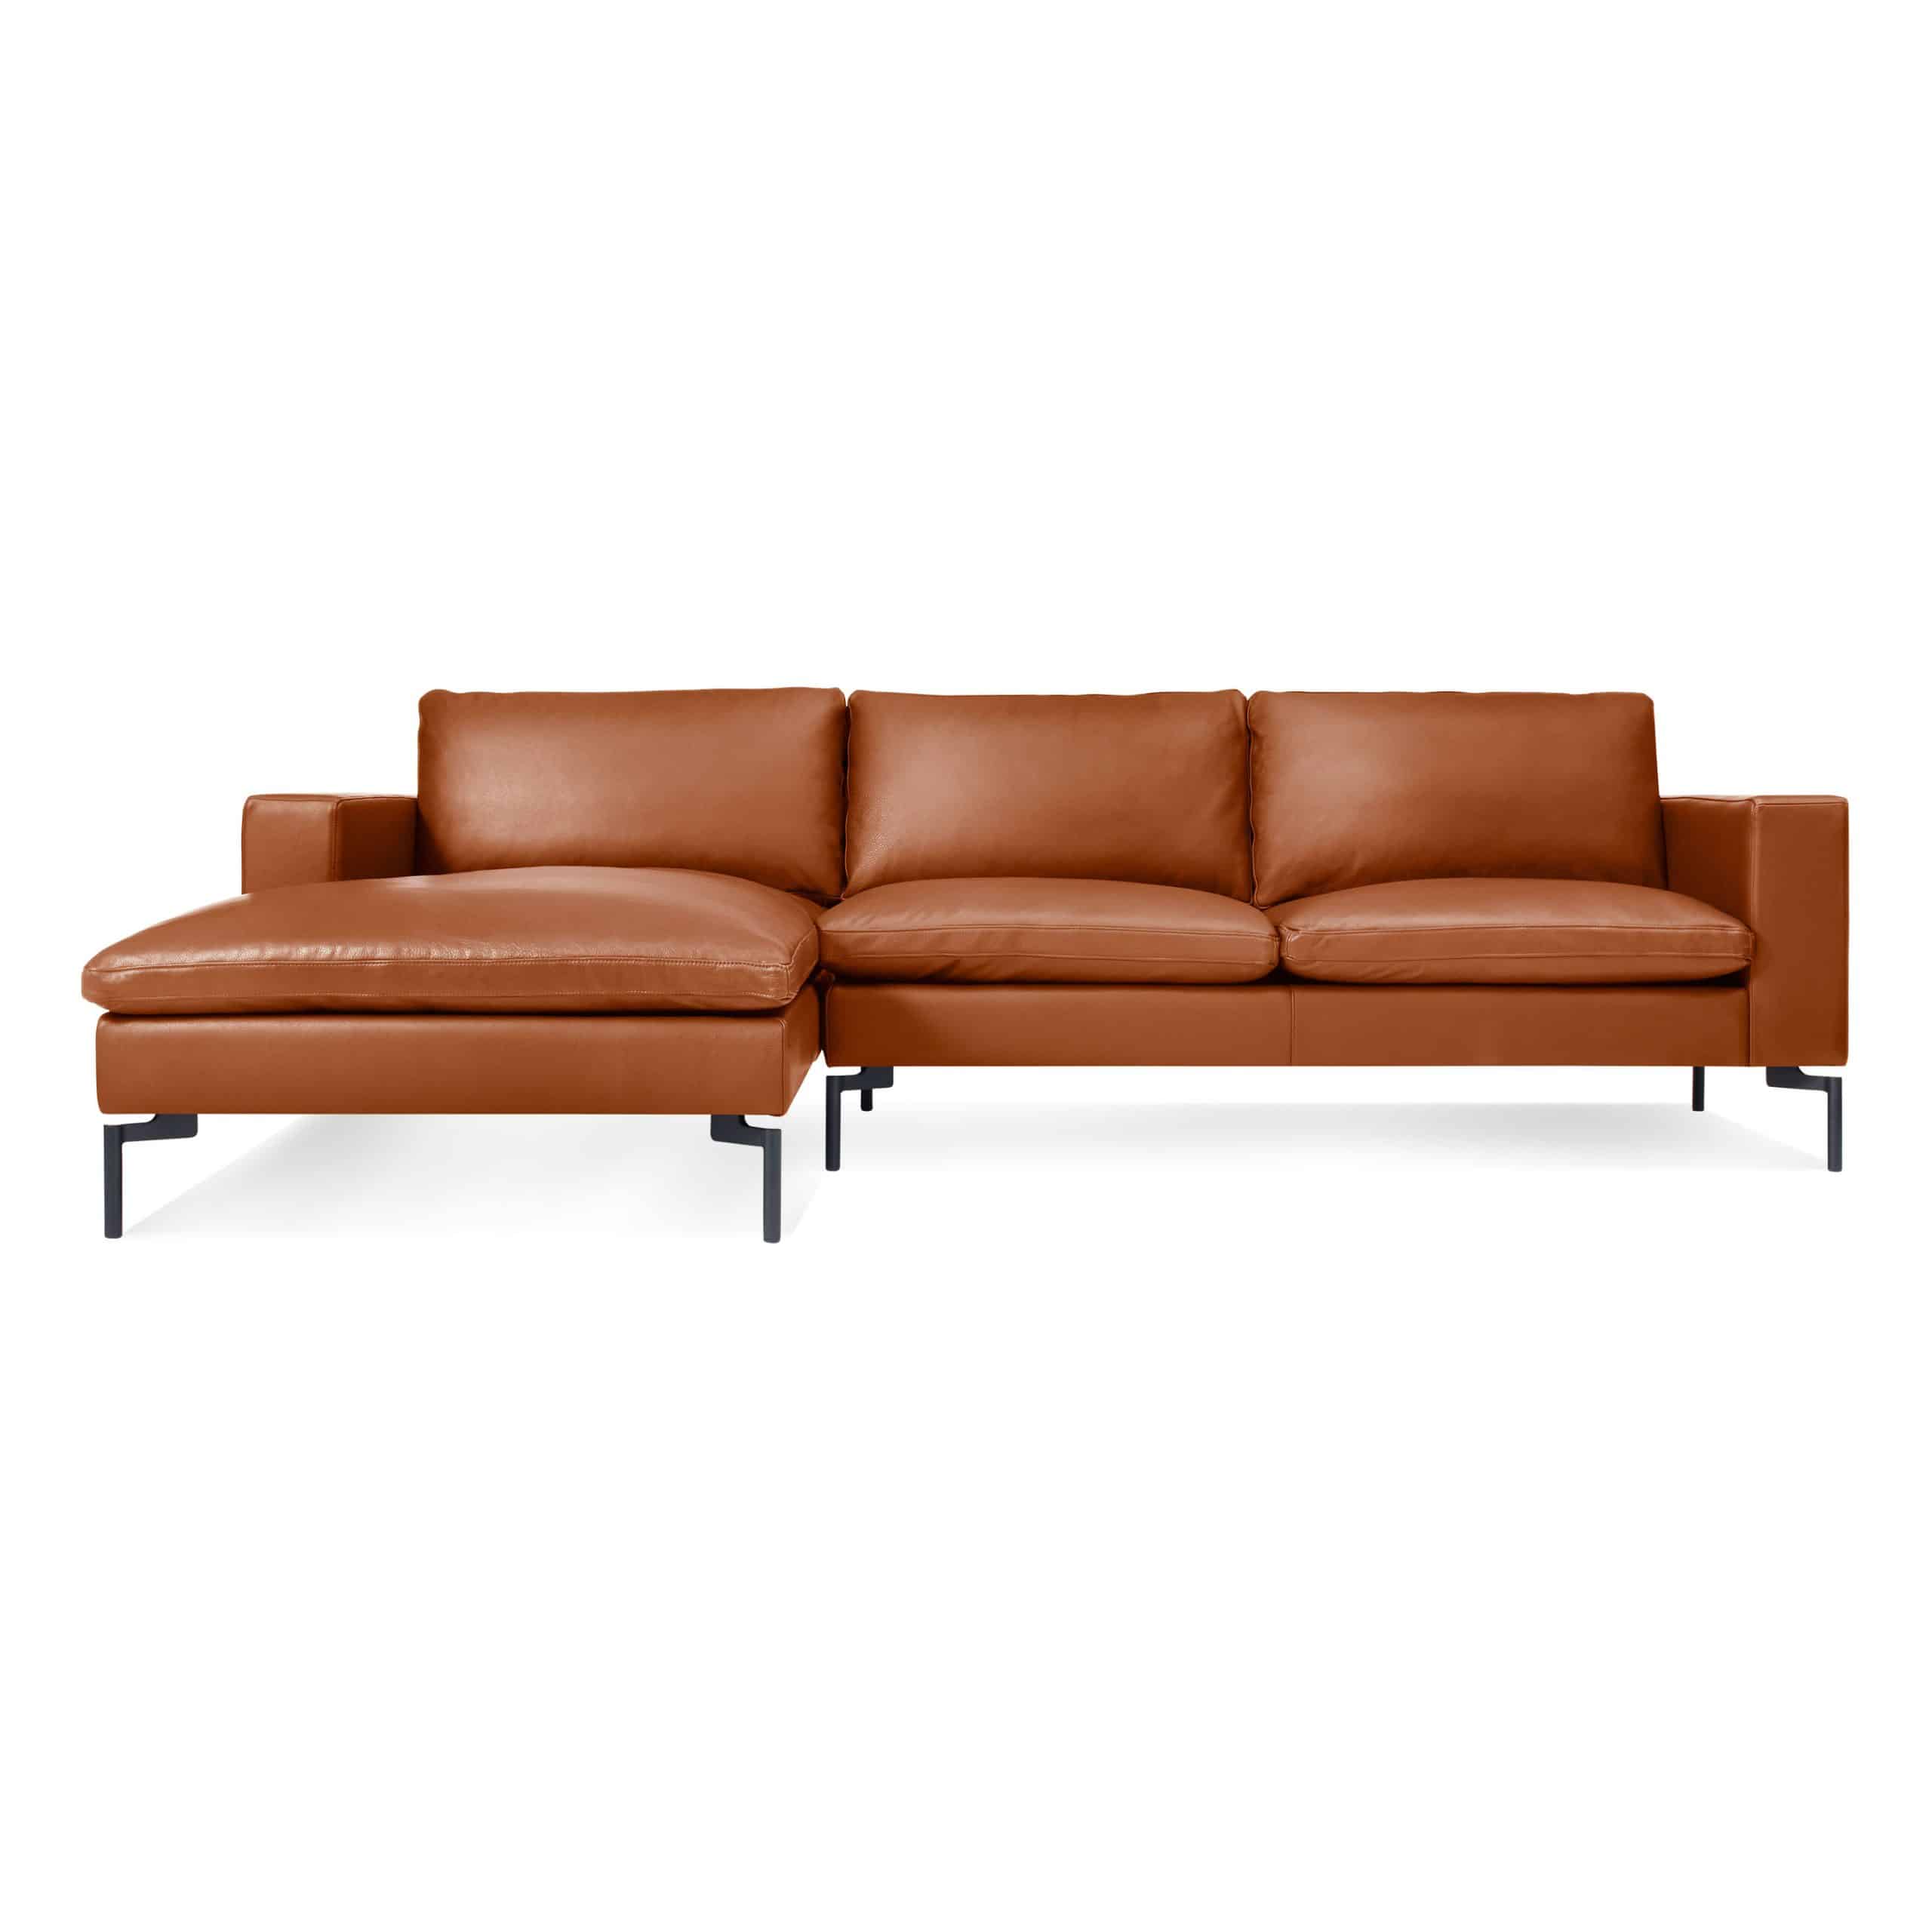 New Standard Leather Sofa W Chaise, San Diego Leather Furniture